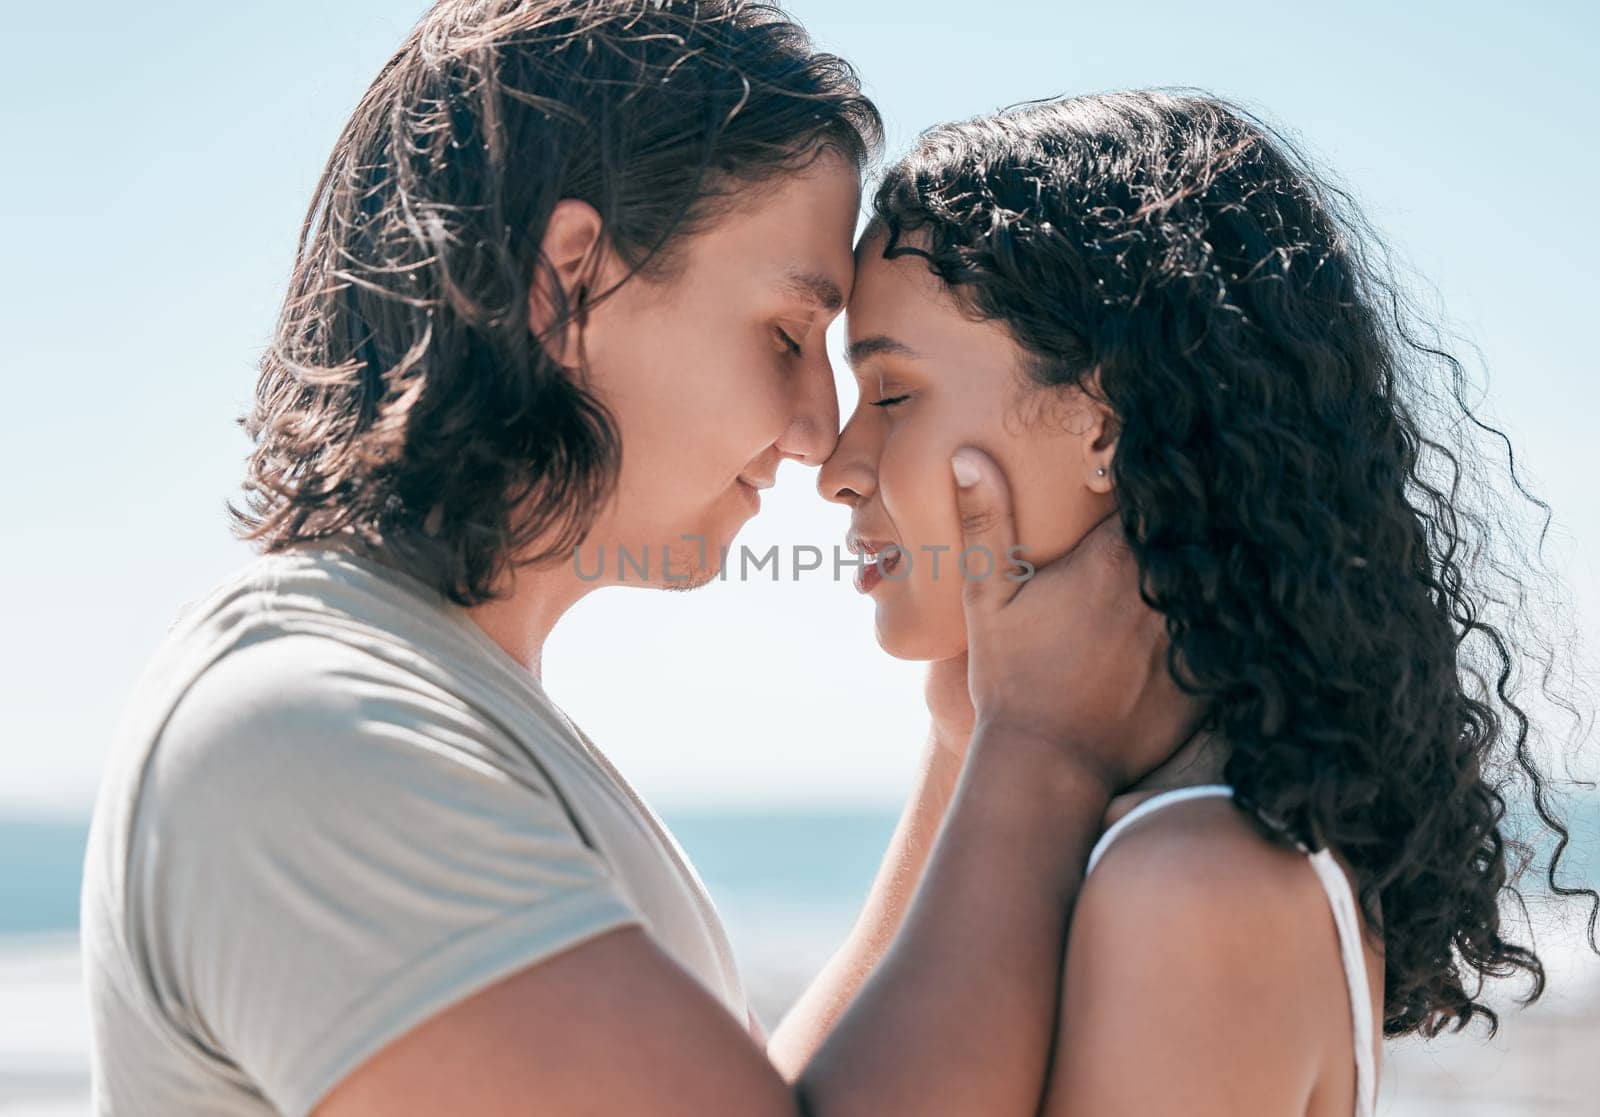 Love, hands on face and couple relax at a beach, in love and romantic on blue sky background. Intimate, moment and romance by man with woman on ocean trip, sweet and calm relationship moment in Bali.